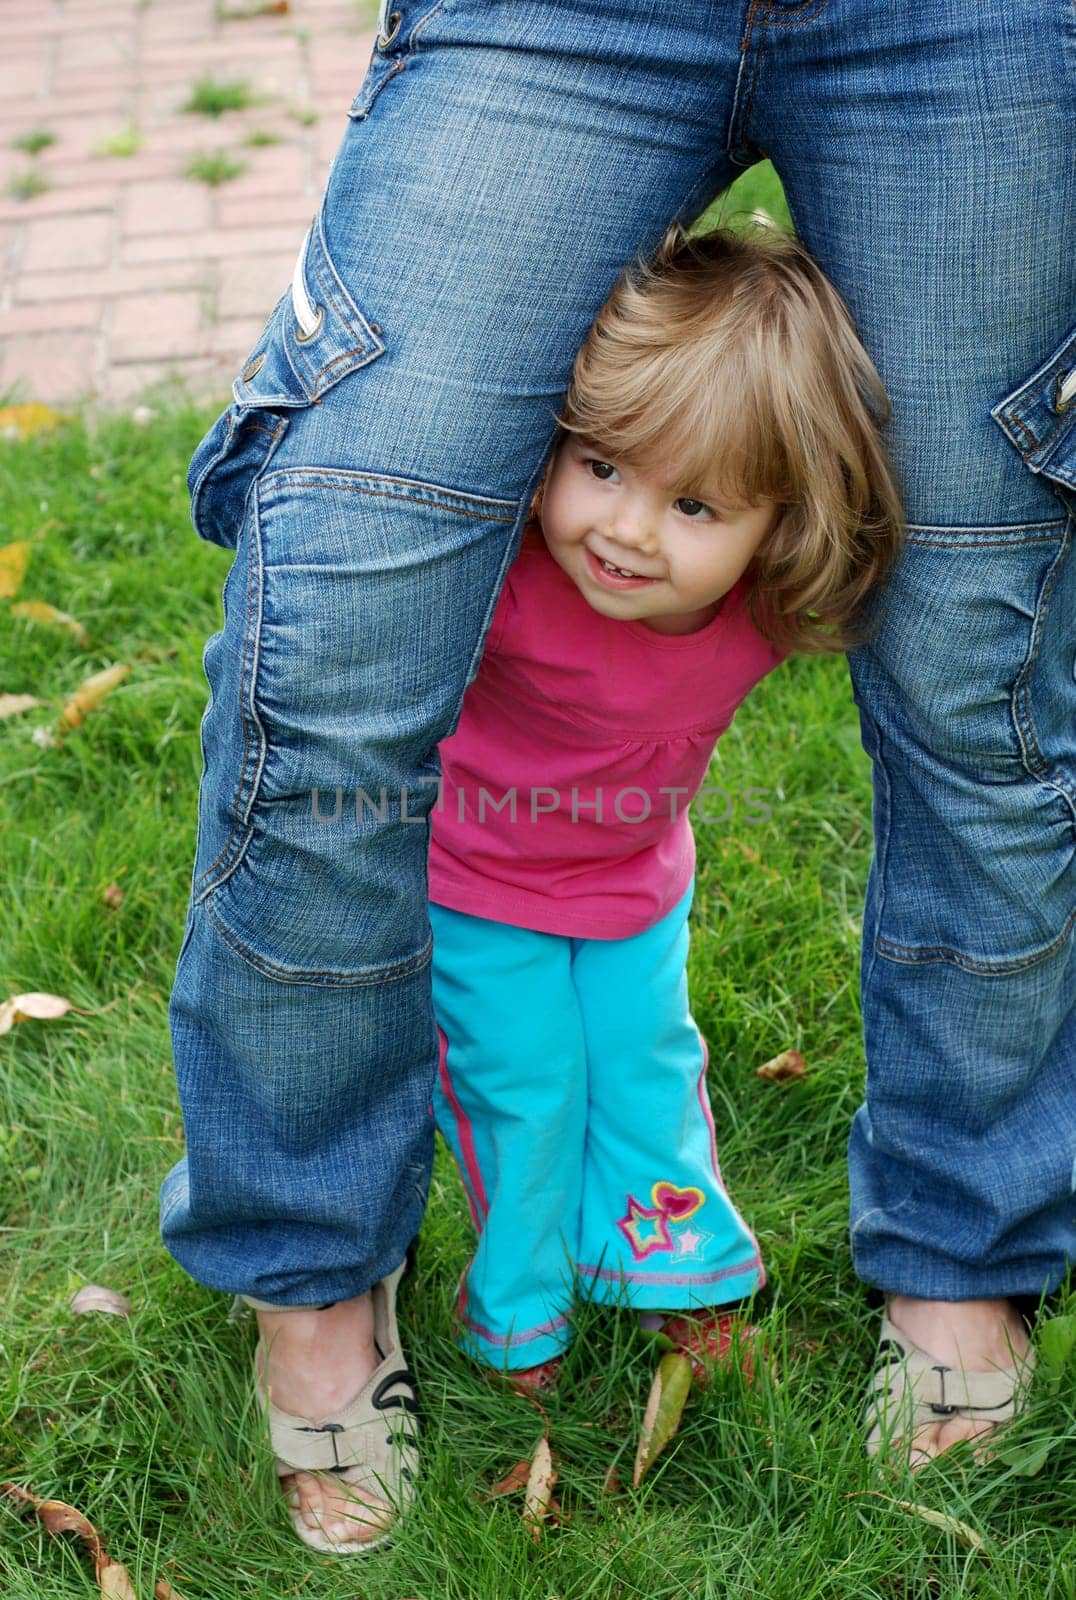 Childish shyness, timidity, insecurity. A defenseless child seeks support from a parent. Cute little girl hiding behind her mom by aprilphoto